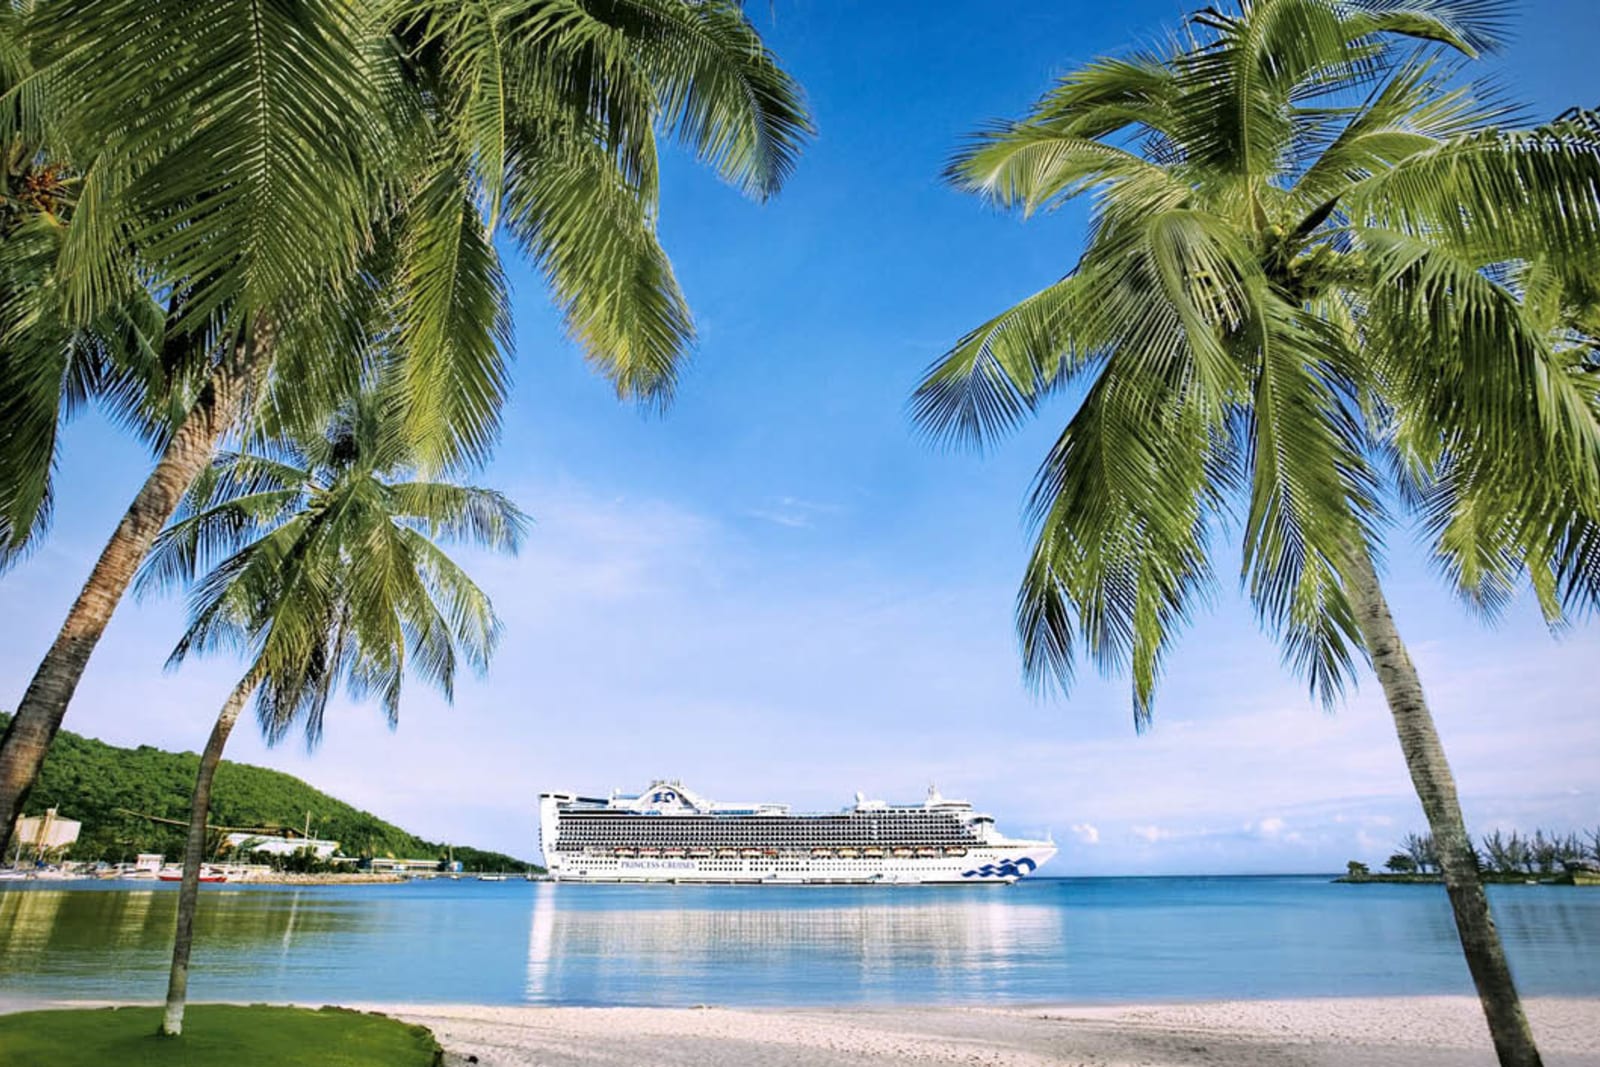 A Princess Cruise in the Caribbean